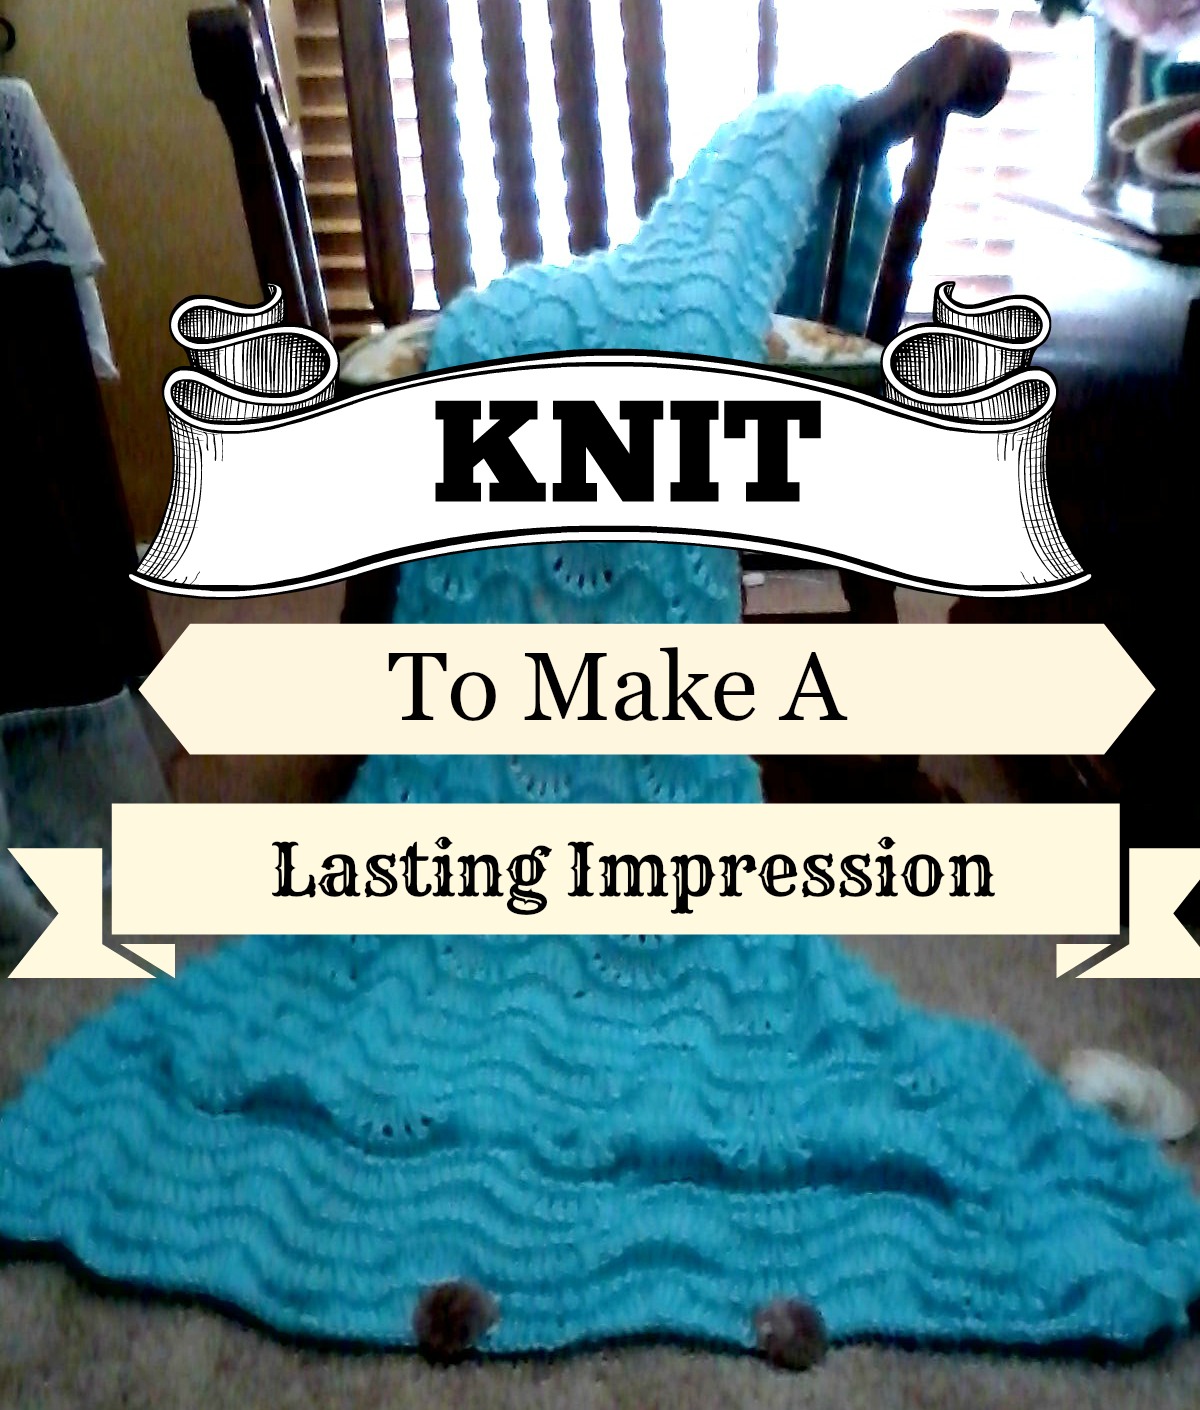 KNIT To Make A Lasting Impression